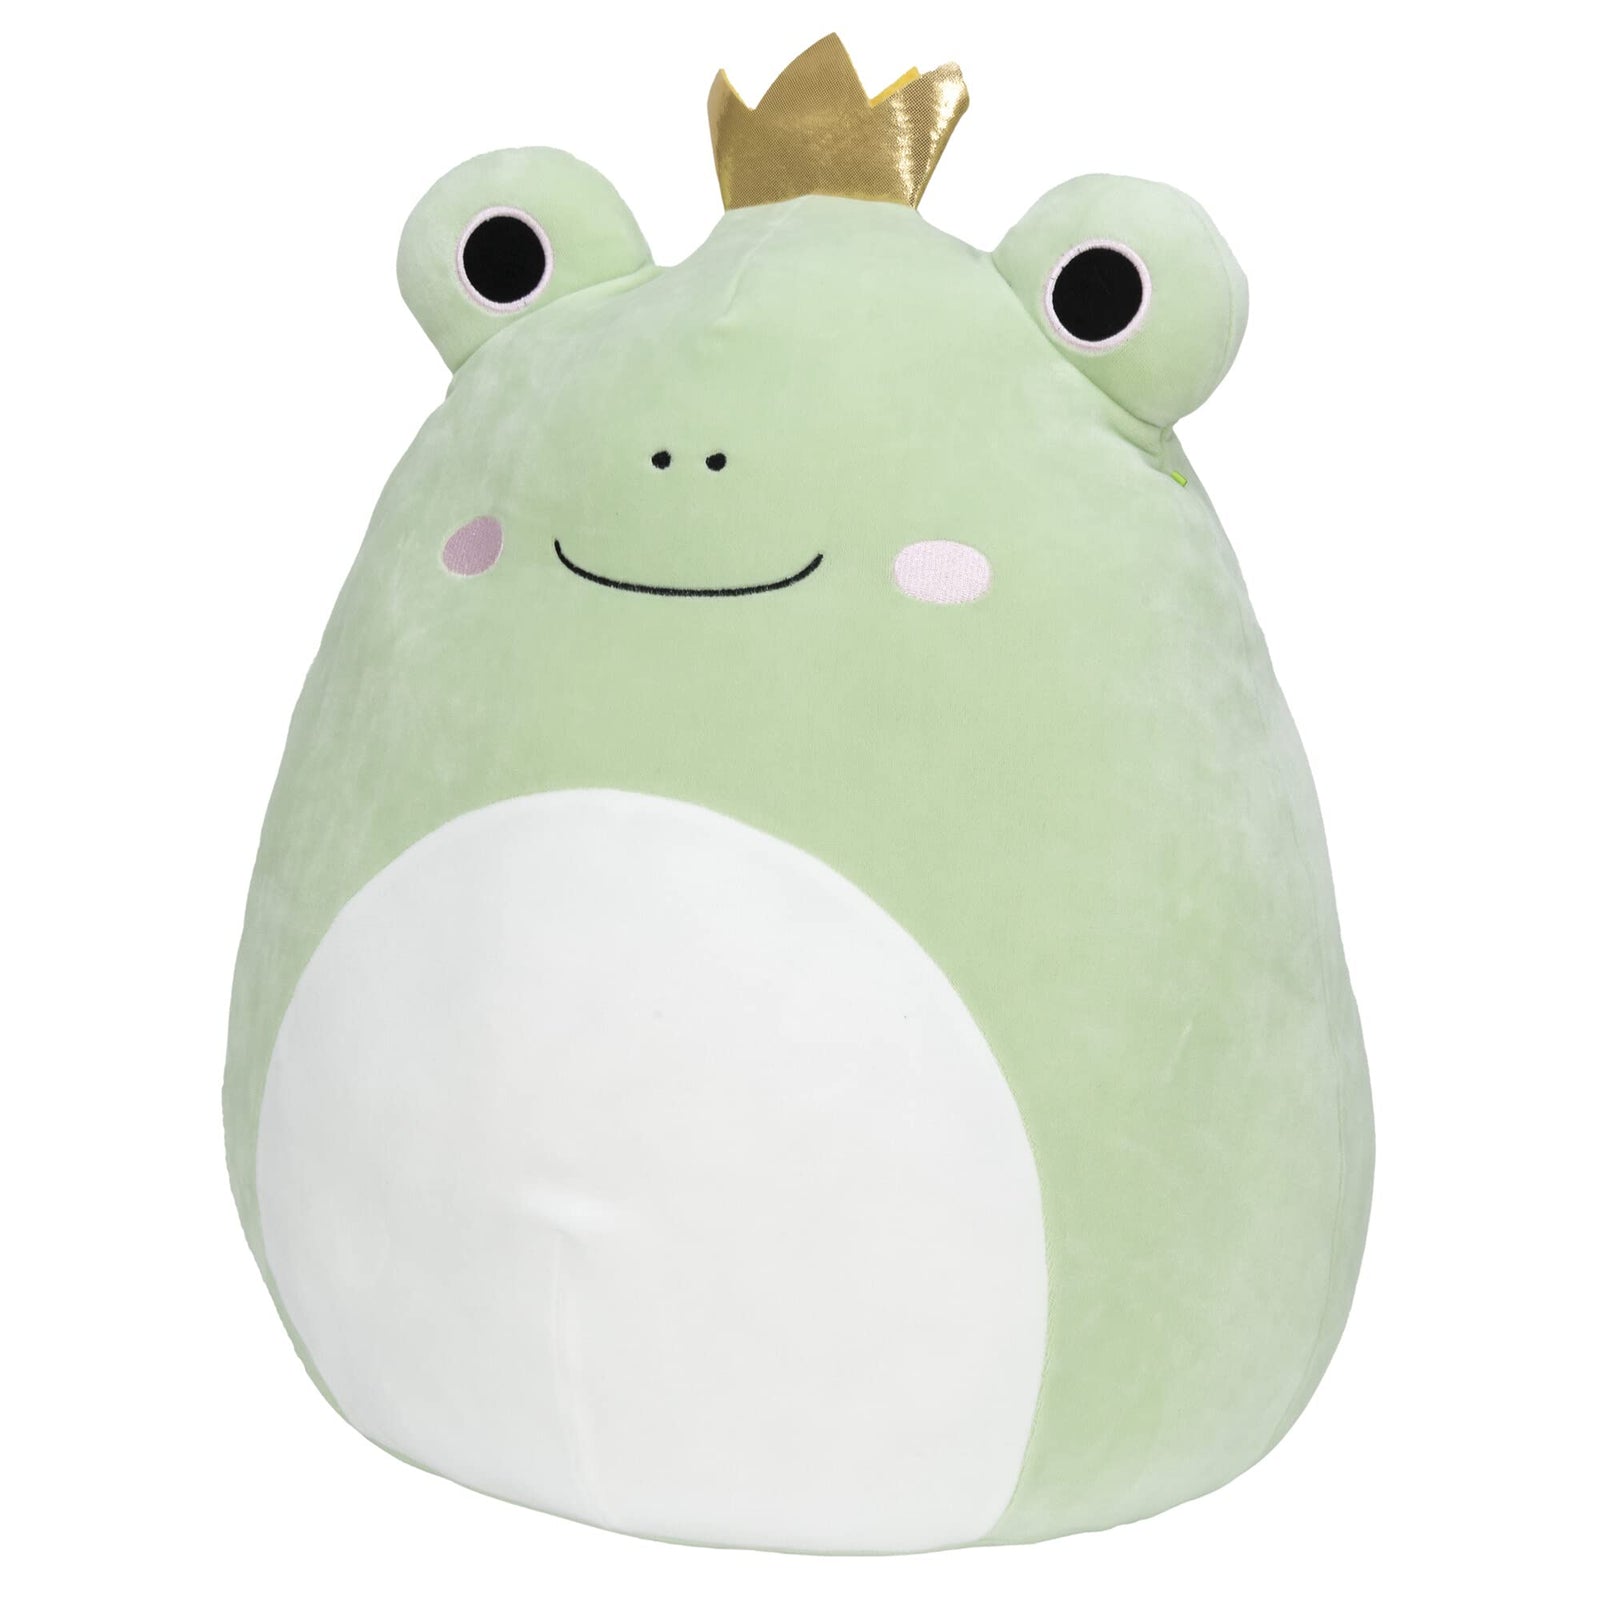 Squishmallow 16-Inch Frog Prince - Add Baratelli to Your Squad, Ultrasoft Stuffed Animal Large Plush Toy, Official Kellytoy Plush